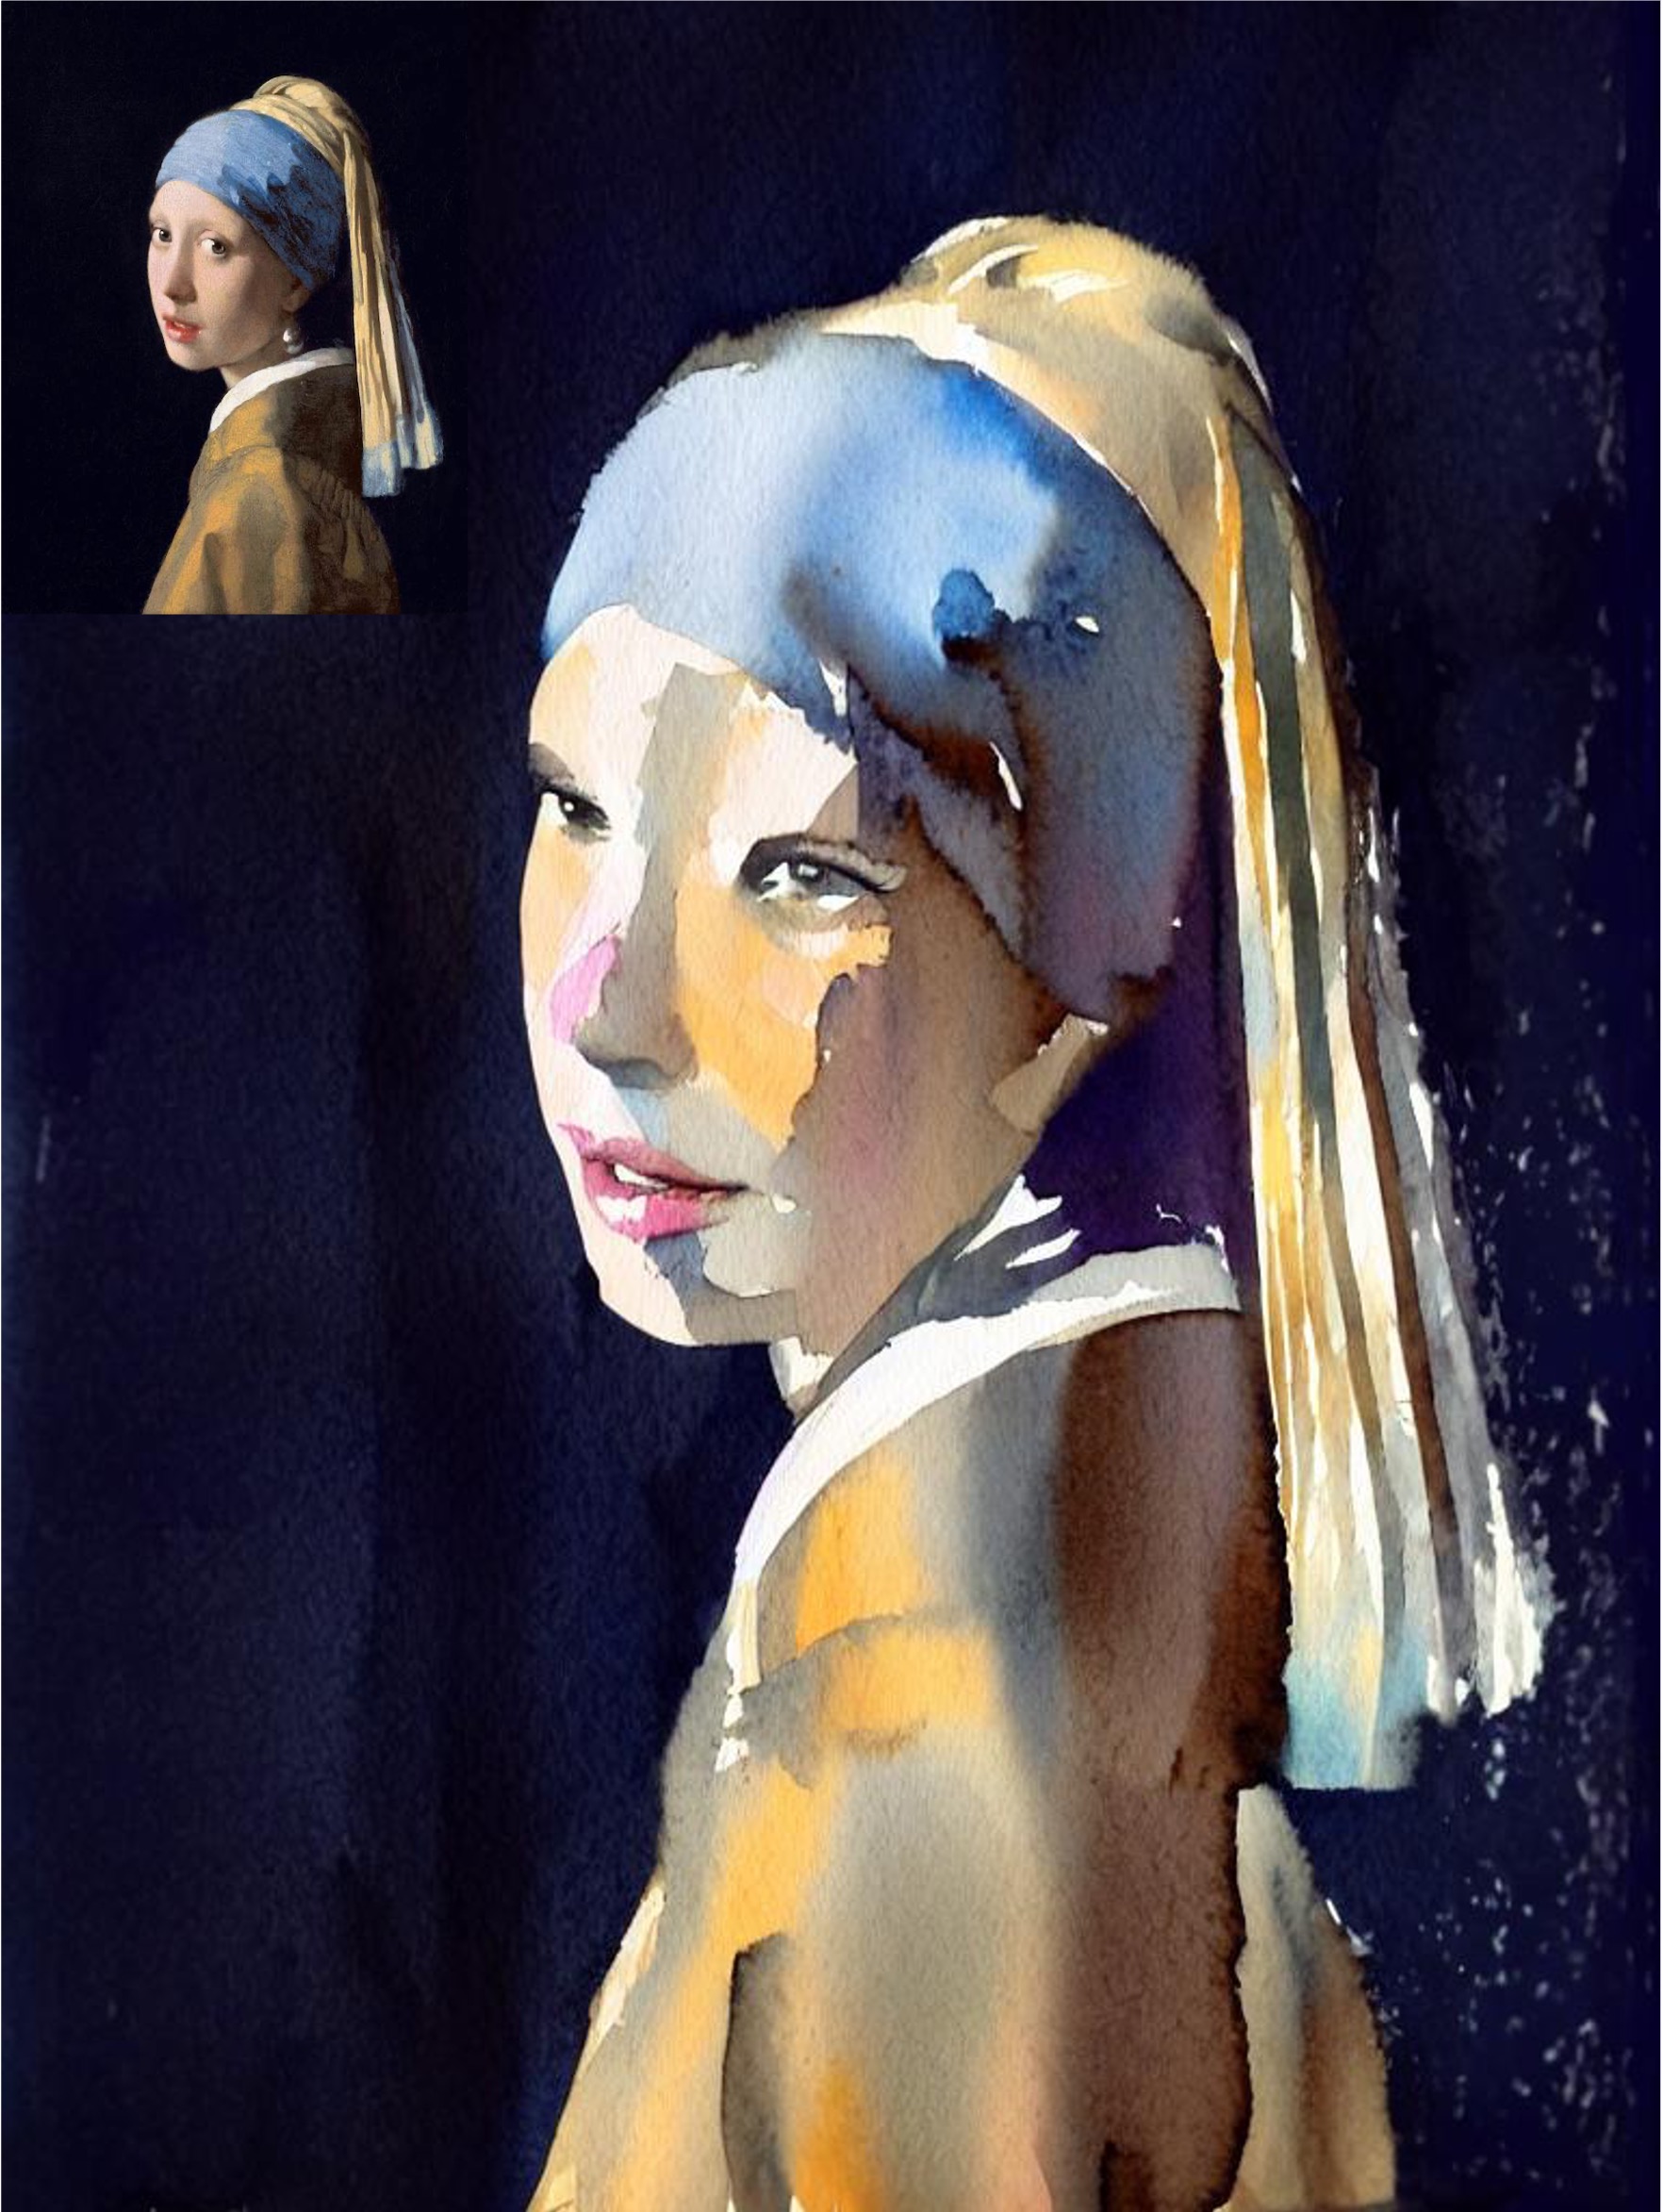 A watercolor painting of a girl